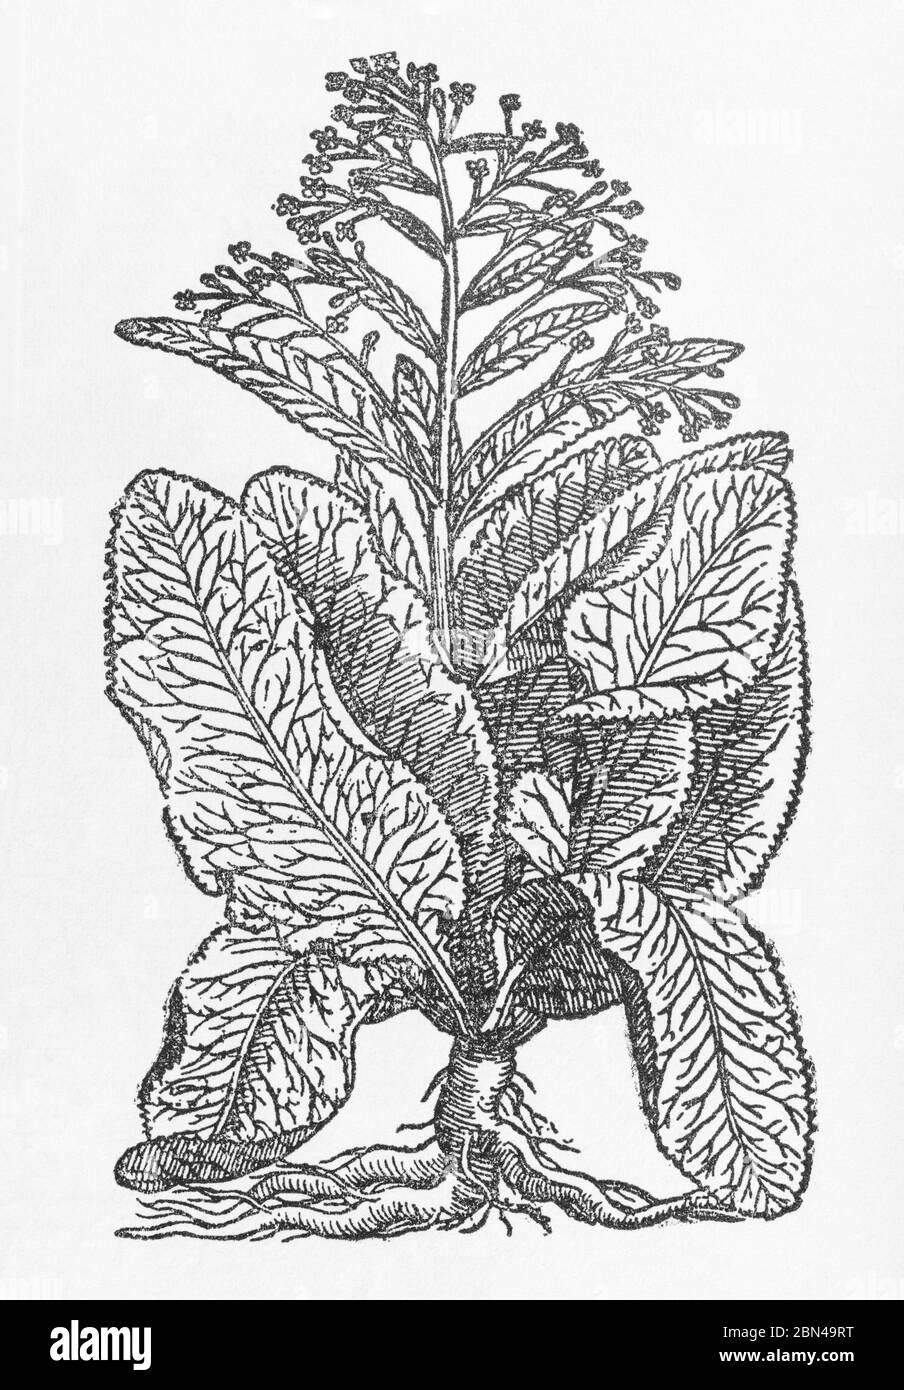 Horse-Radish / Cochlearia armoracia plant woodcut from Gerarde's Herball, History of Plants. He refers to it as Raphanus rusticanus. P187 Stock Photo